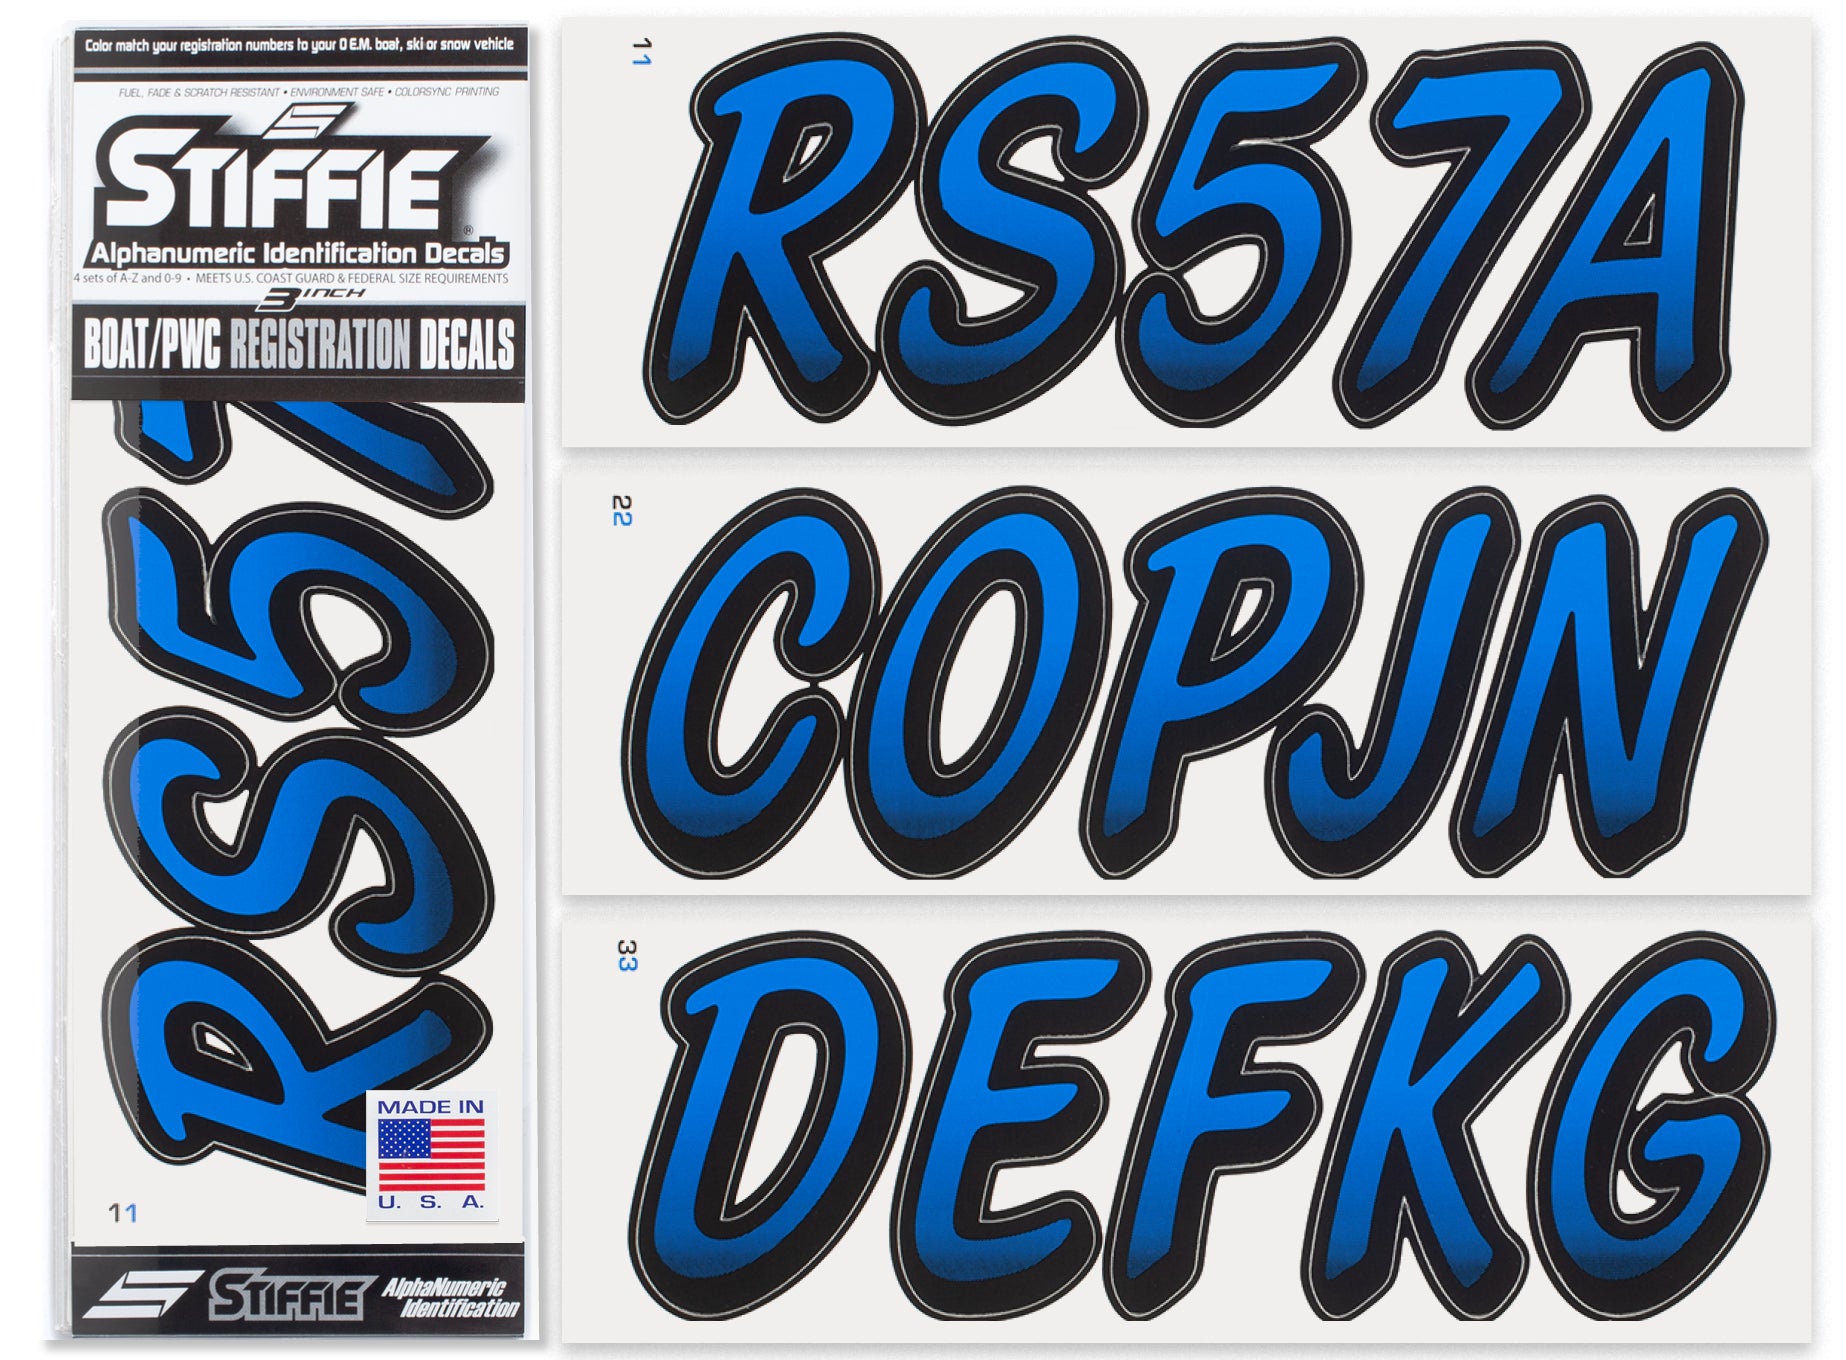 STIFFIE Whipline Octane Blue/Black 3" Alpha-Numeric Registration Identification Numbers Stickers Decals for Boats & Personal Watercraft